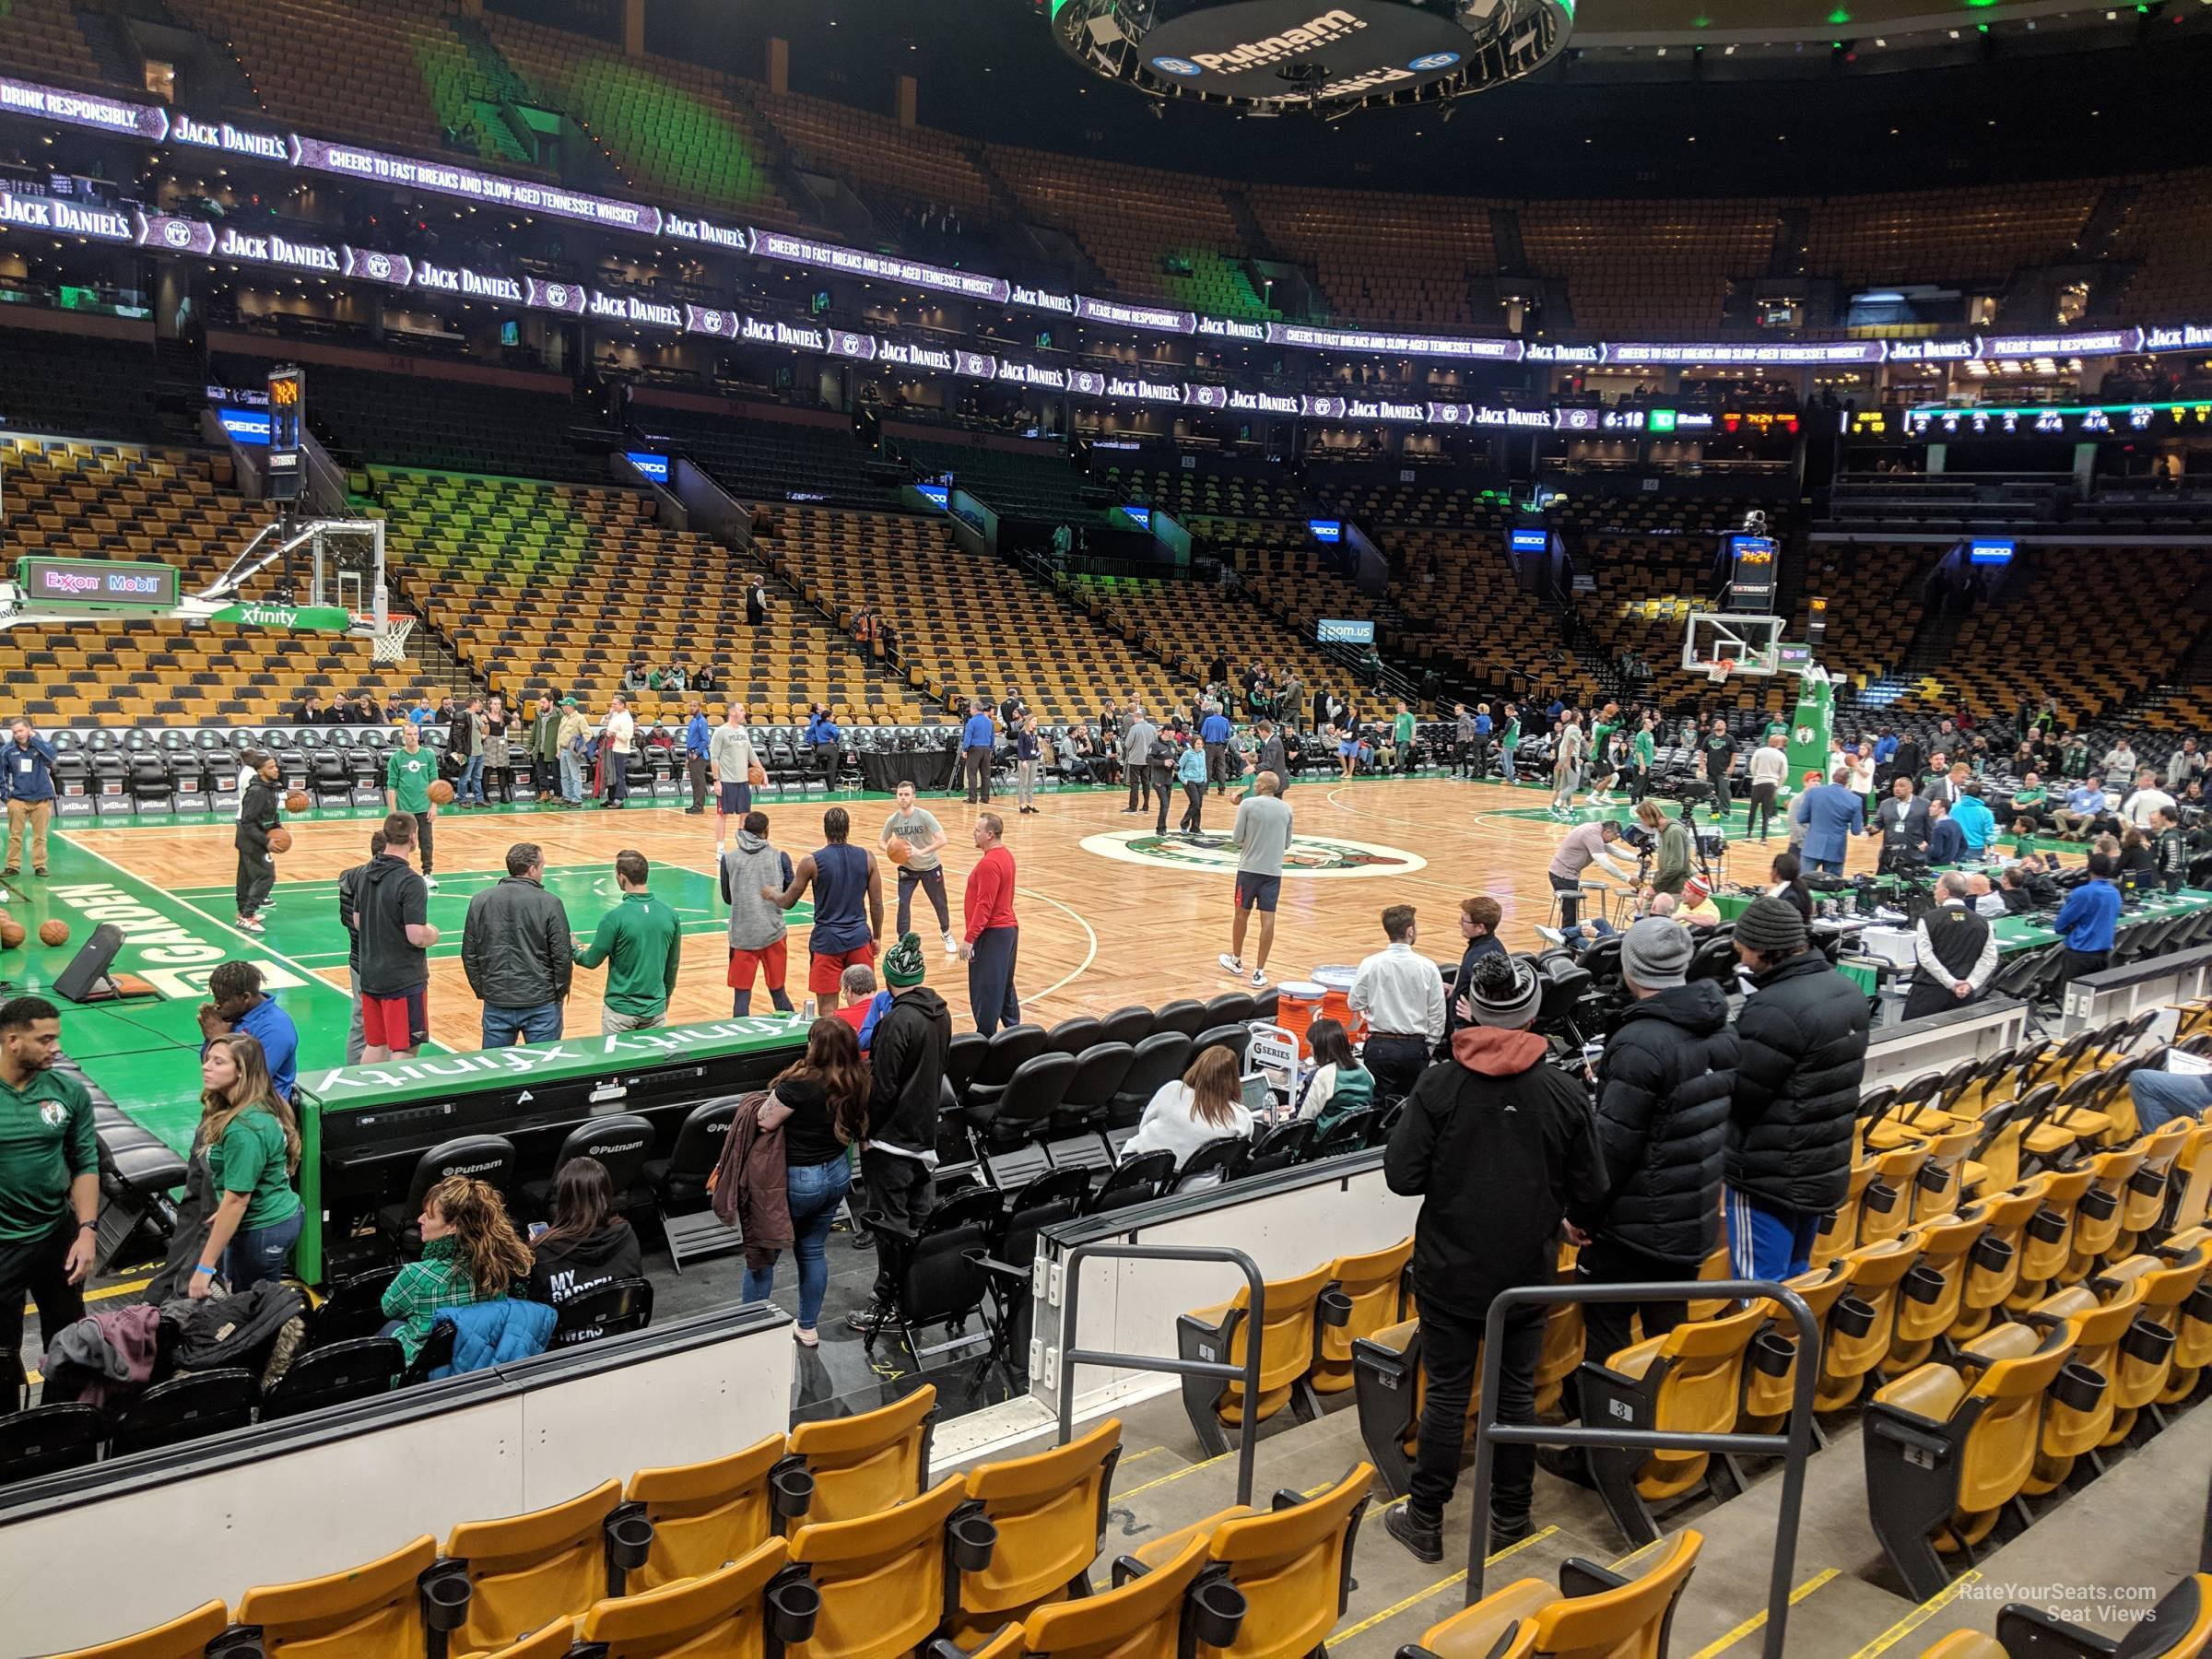 loge 3, row 7 seat view  for basketball - td garden